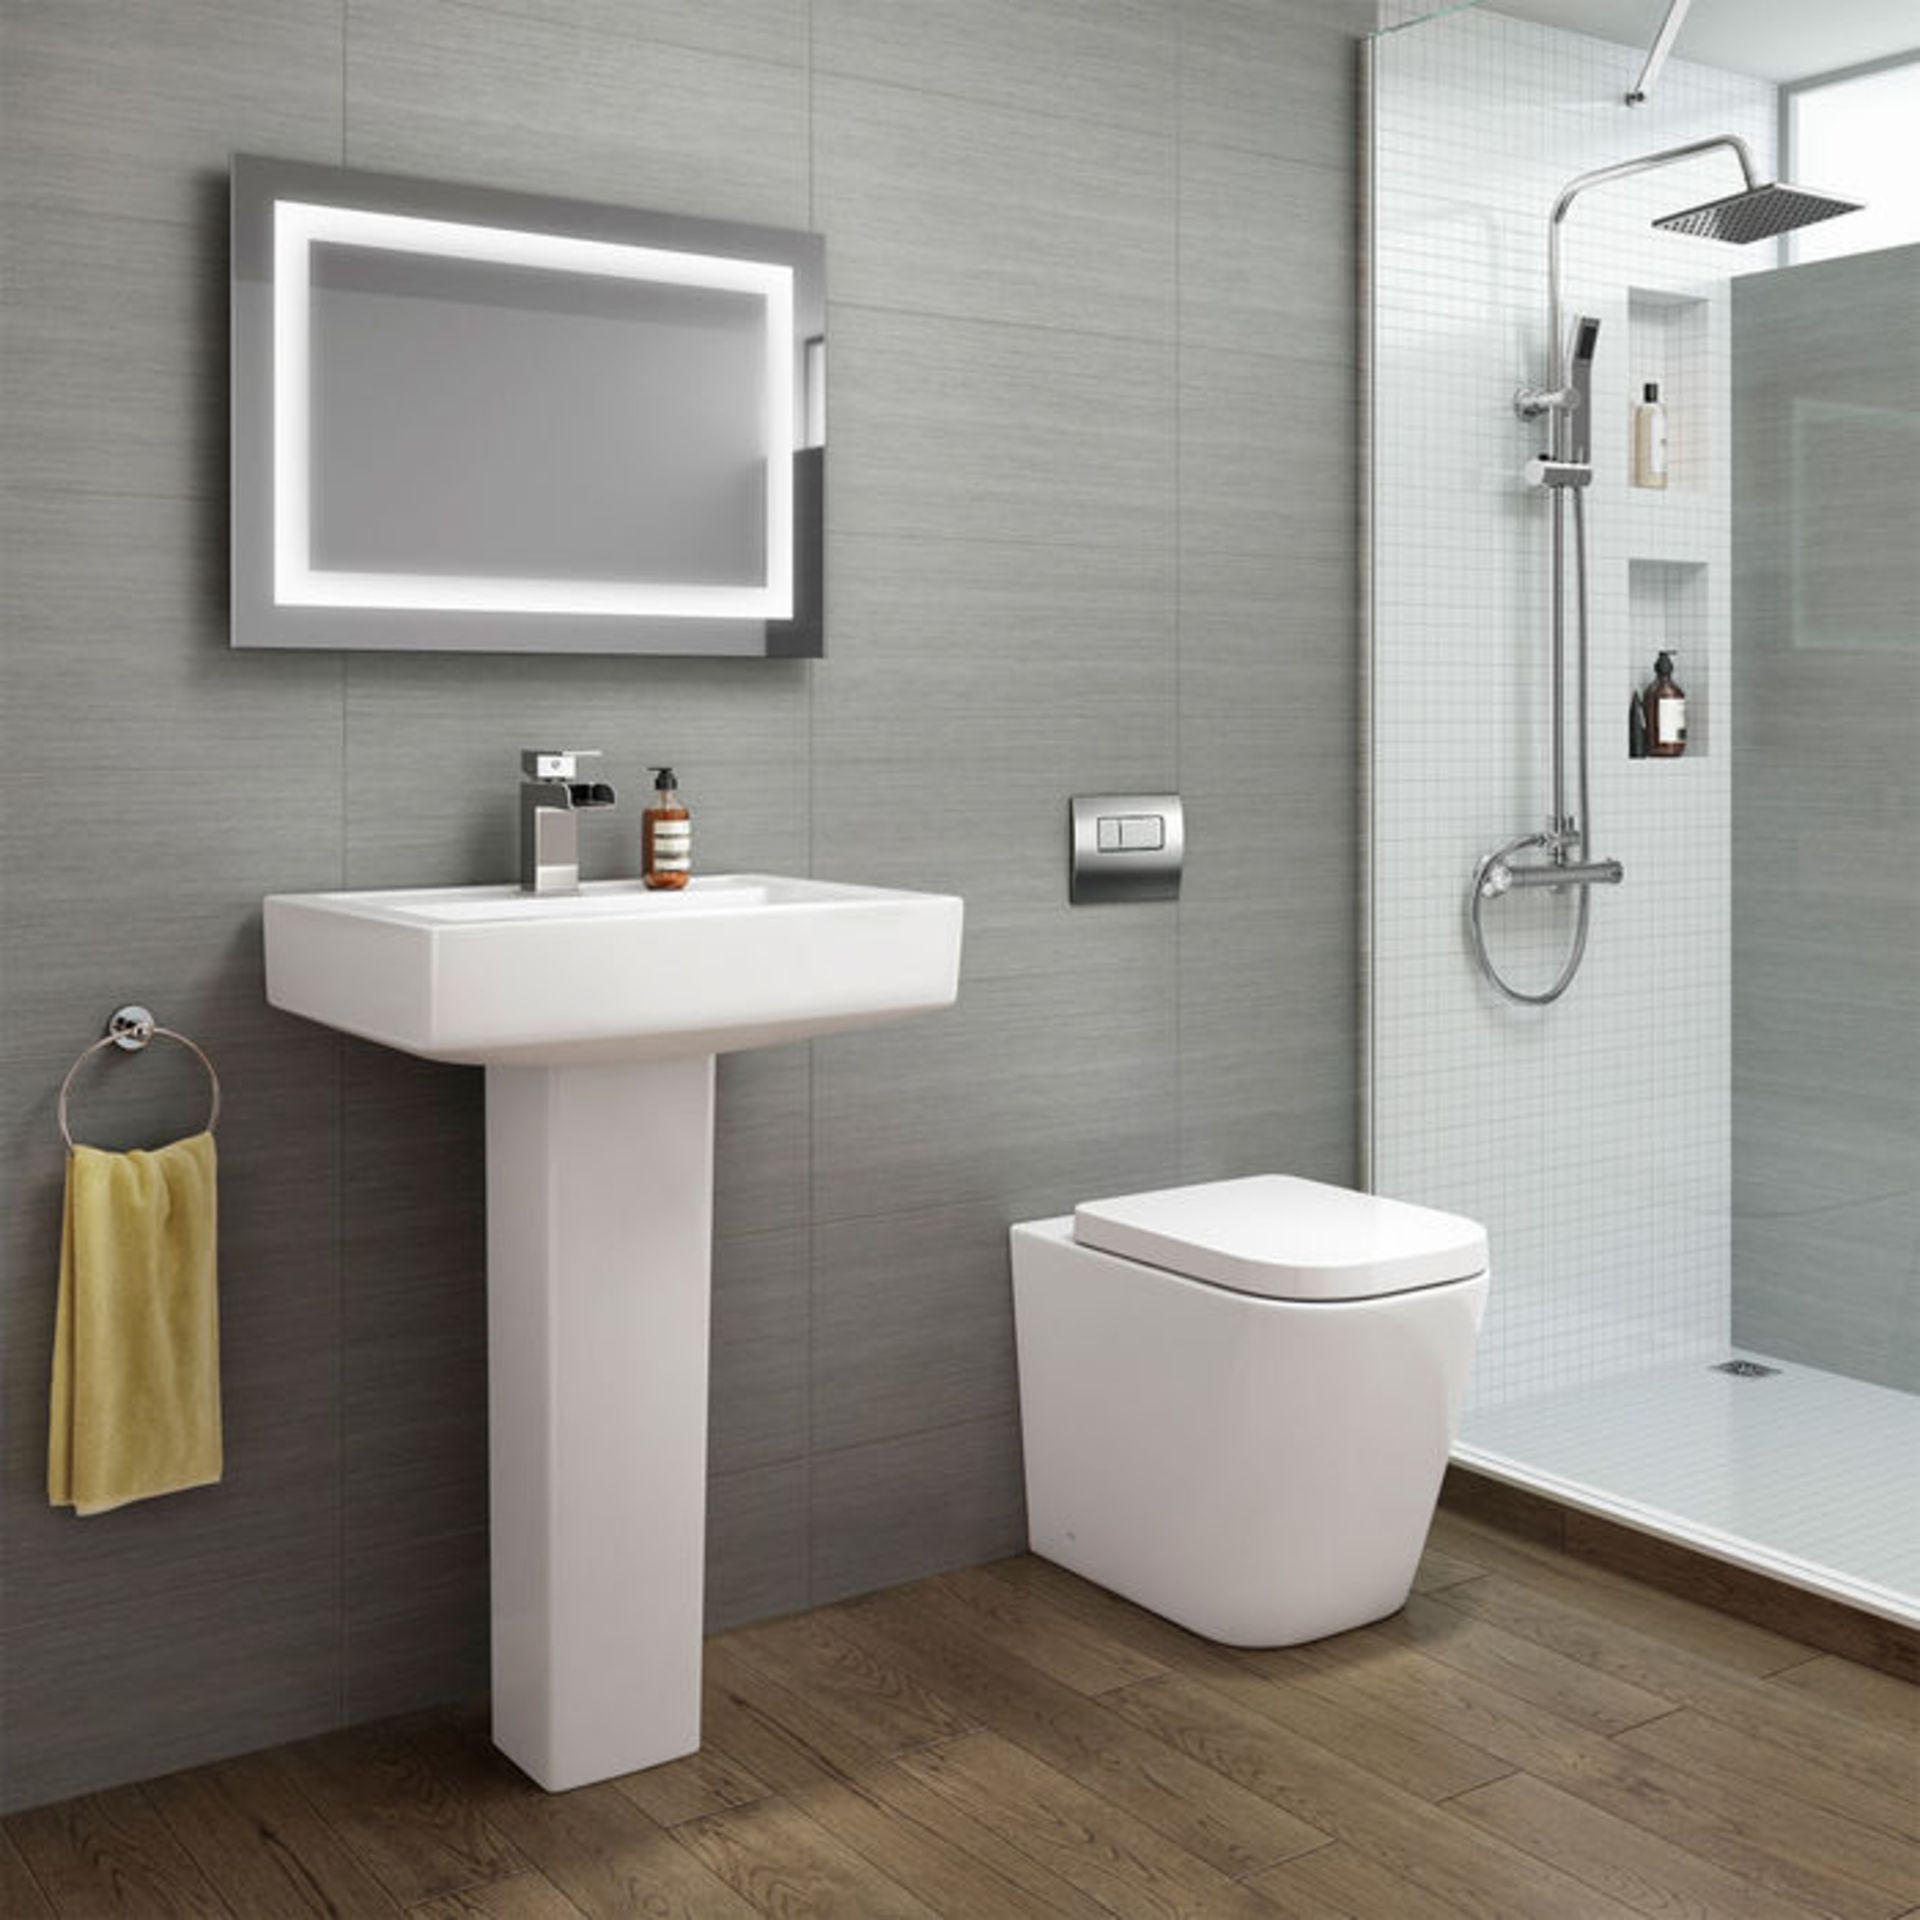 New Florence Rimless Back To Wall Toilet Inc Luxury Soft Close Seat Rimless Design Makes It Eas... - Image 2 of 3